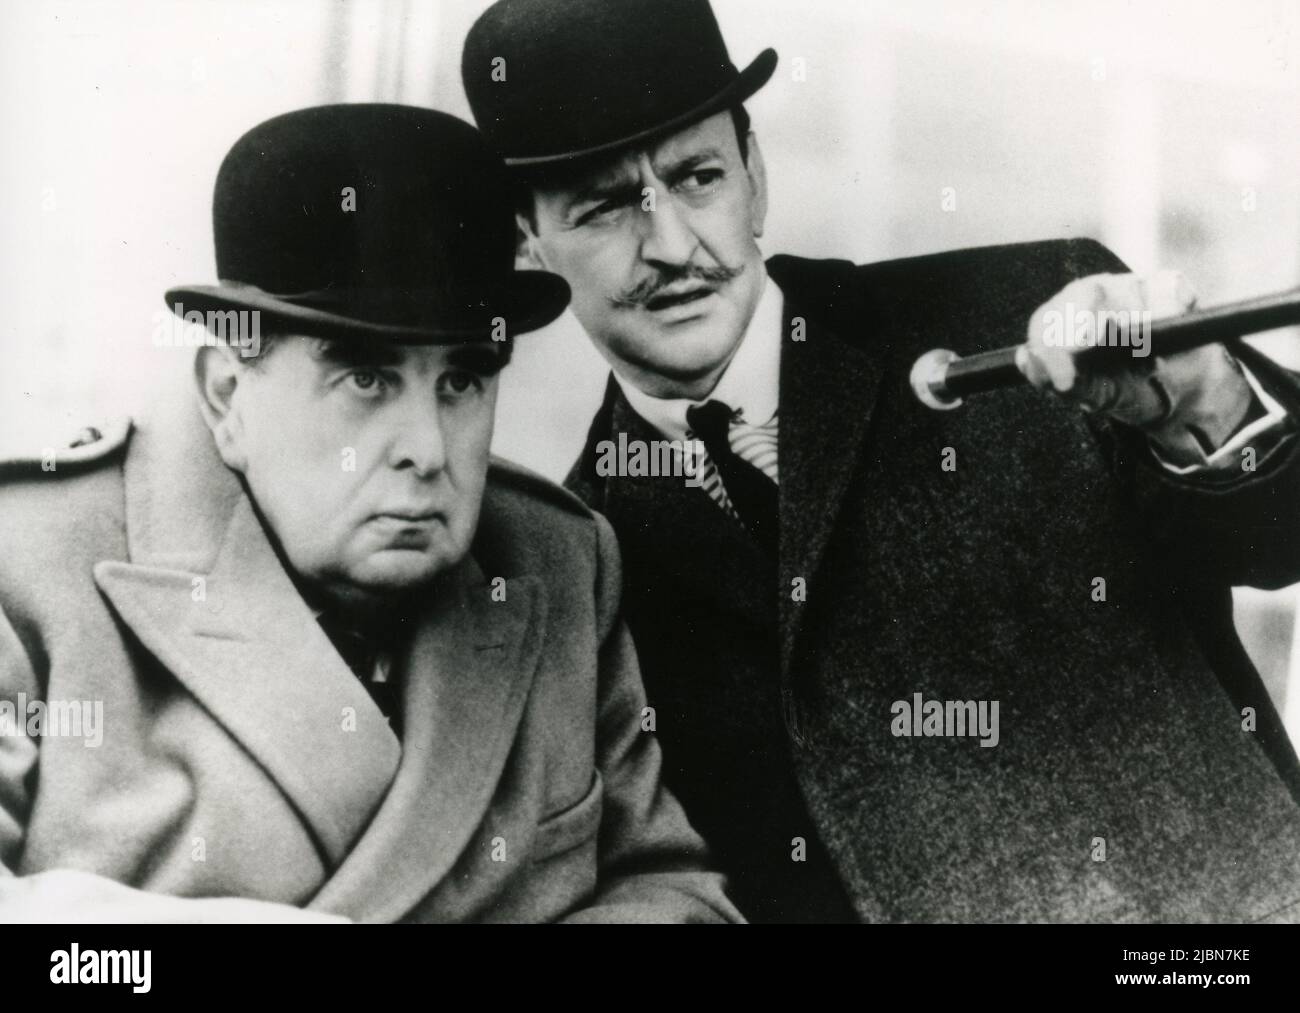 Actors Robert Morley (left) and Tony Randall in the movie The Alphabet Murders, UK 1966 Stock Photo